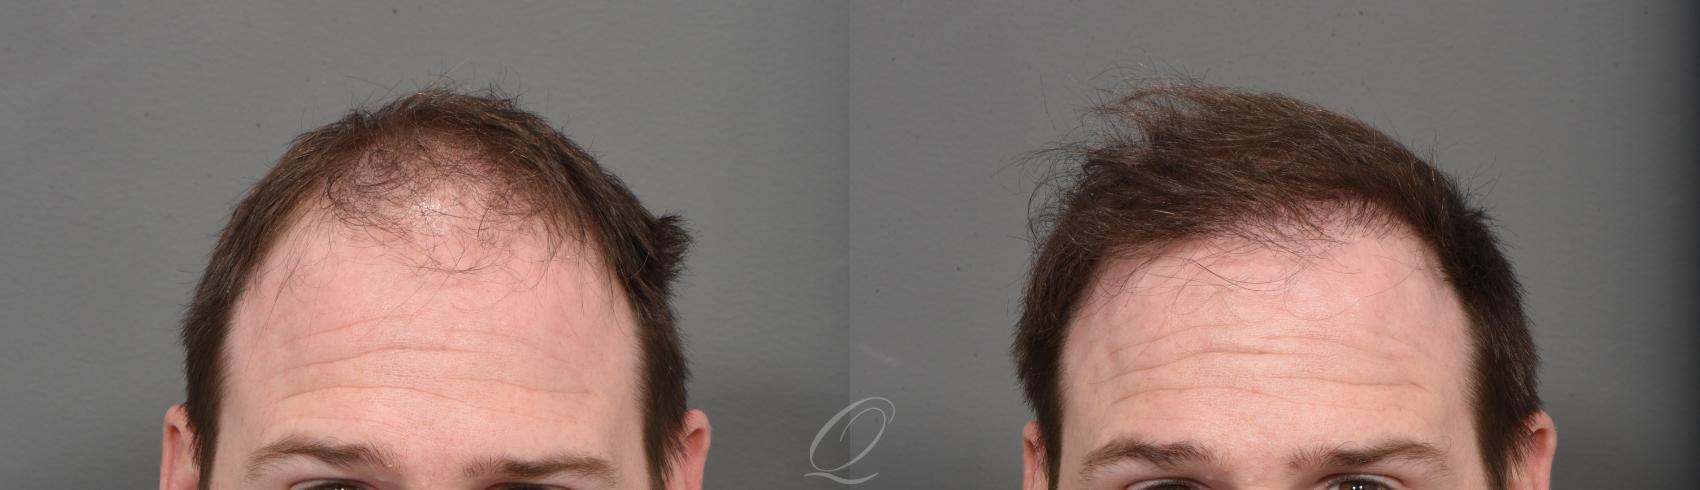 Male Hairline and Central Density Hair Restoration Case 1001523 Before & After Front | Rochester, Buffalo, & Syracuse, NY | Quatela Center for Hair Restoration